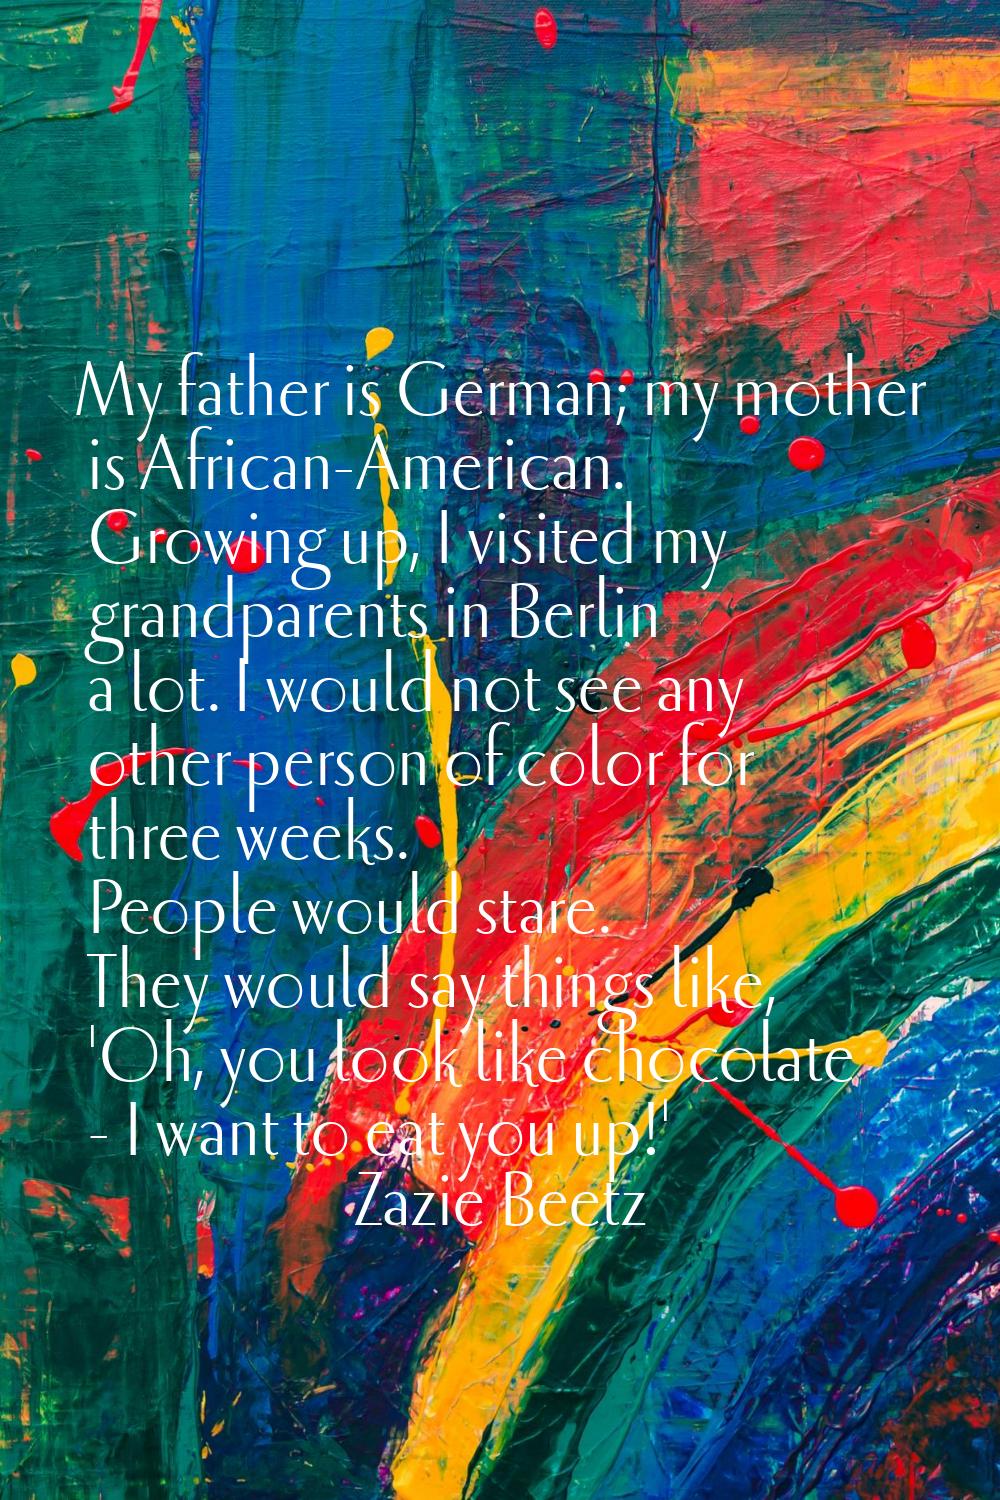 My father is German; my mother is African-American. Growing up, I visited my grandparents in Berlin